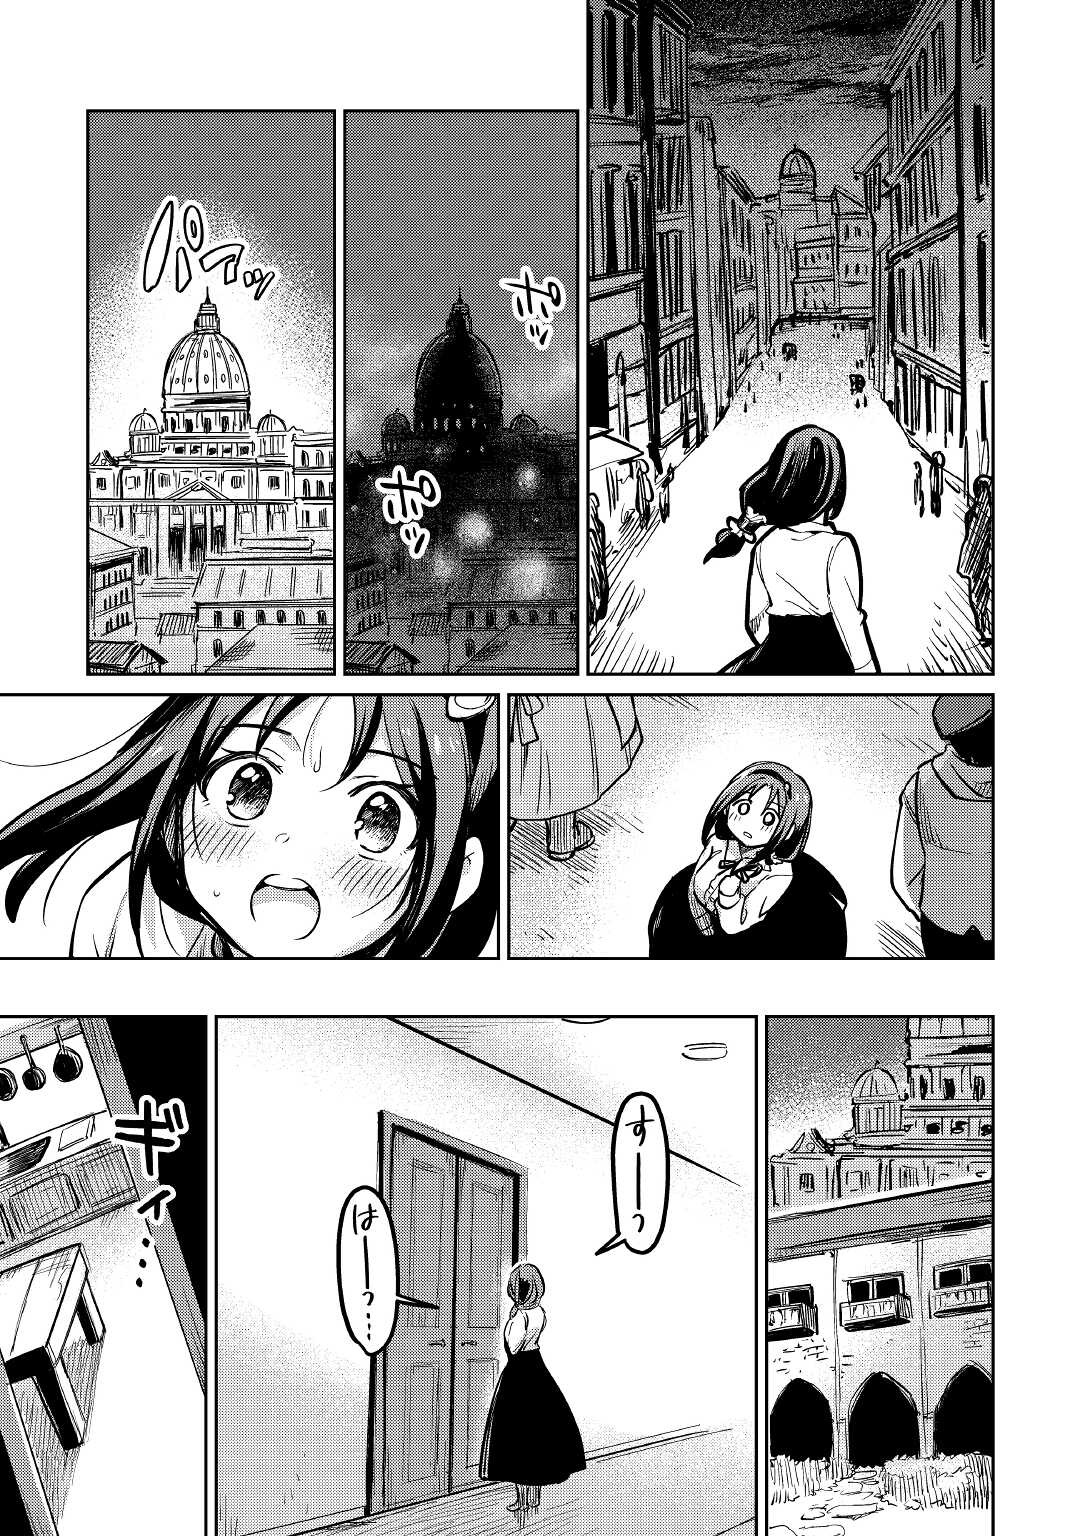 The Former Structural Researcher’s Story of Otherworldly Adventure 第41話 - Page 29